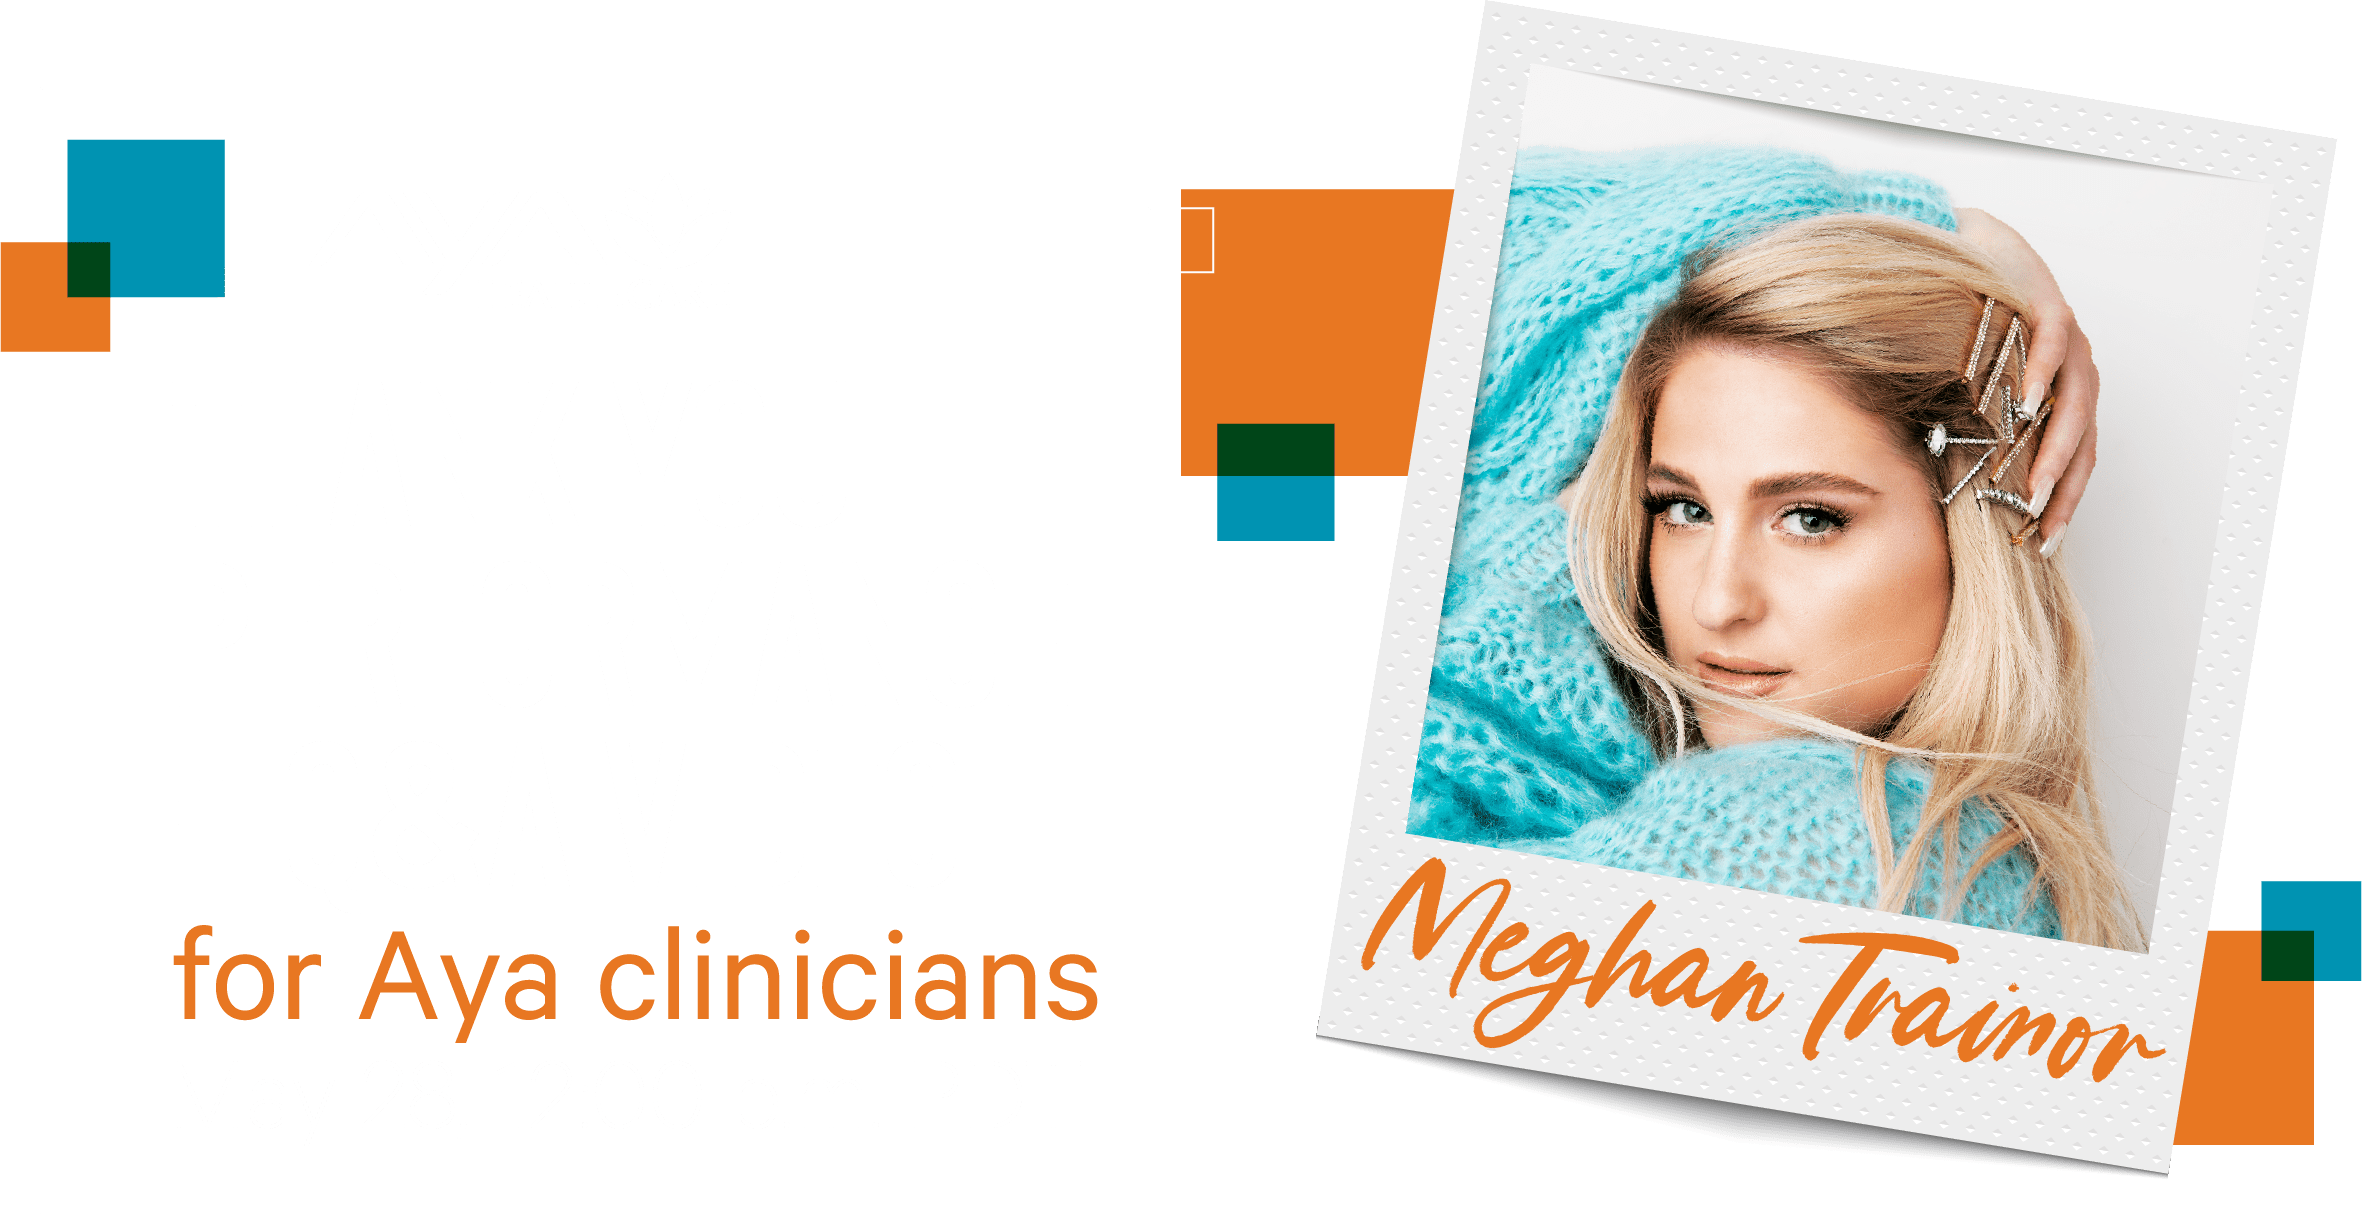 Join Aya Healthcare for an invite-only performance video by superstar Meghan Trainor!